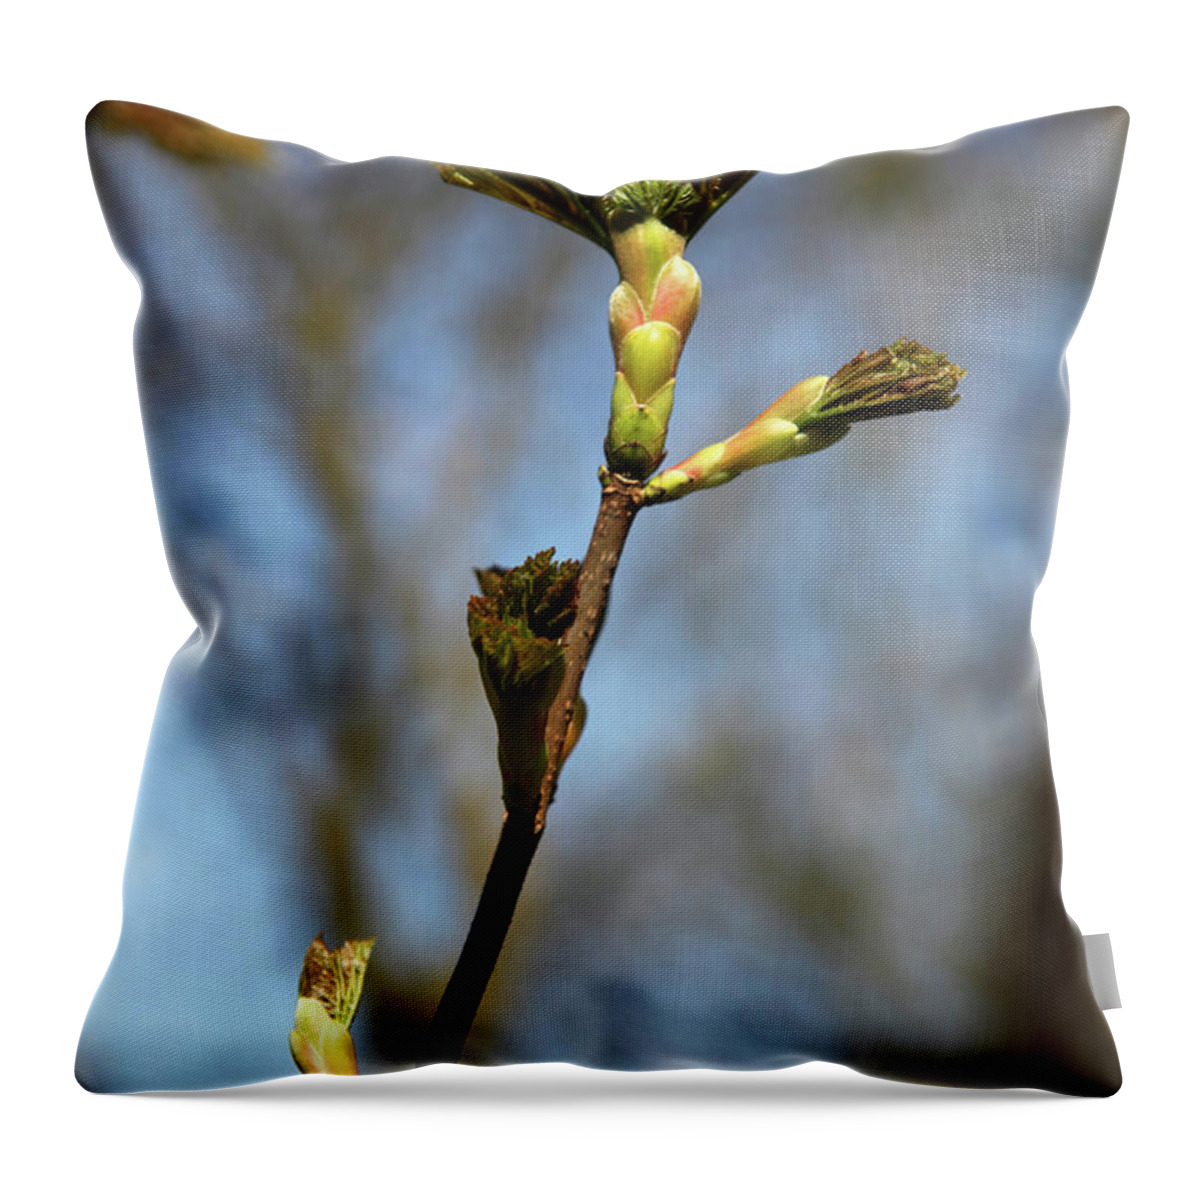 Bradford Throw Pillow featuring the photograph The Start Is Here by Jez C Self